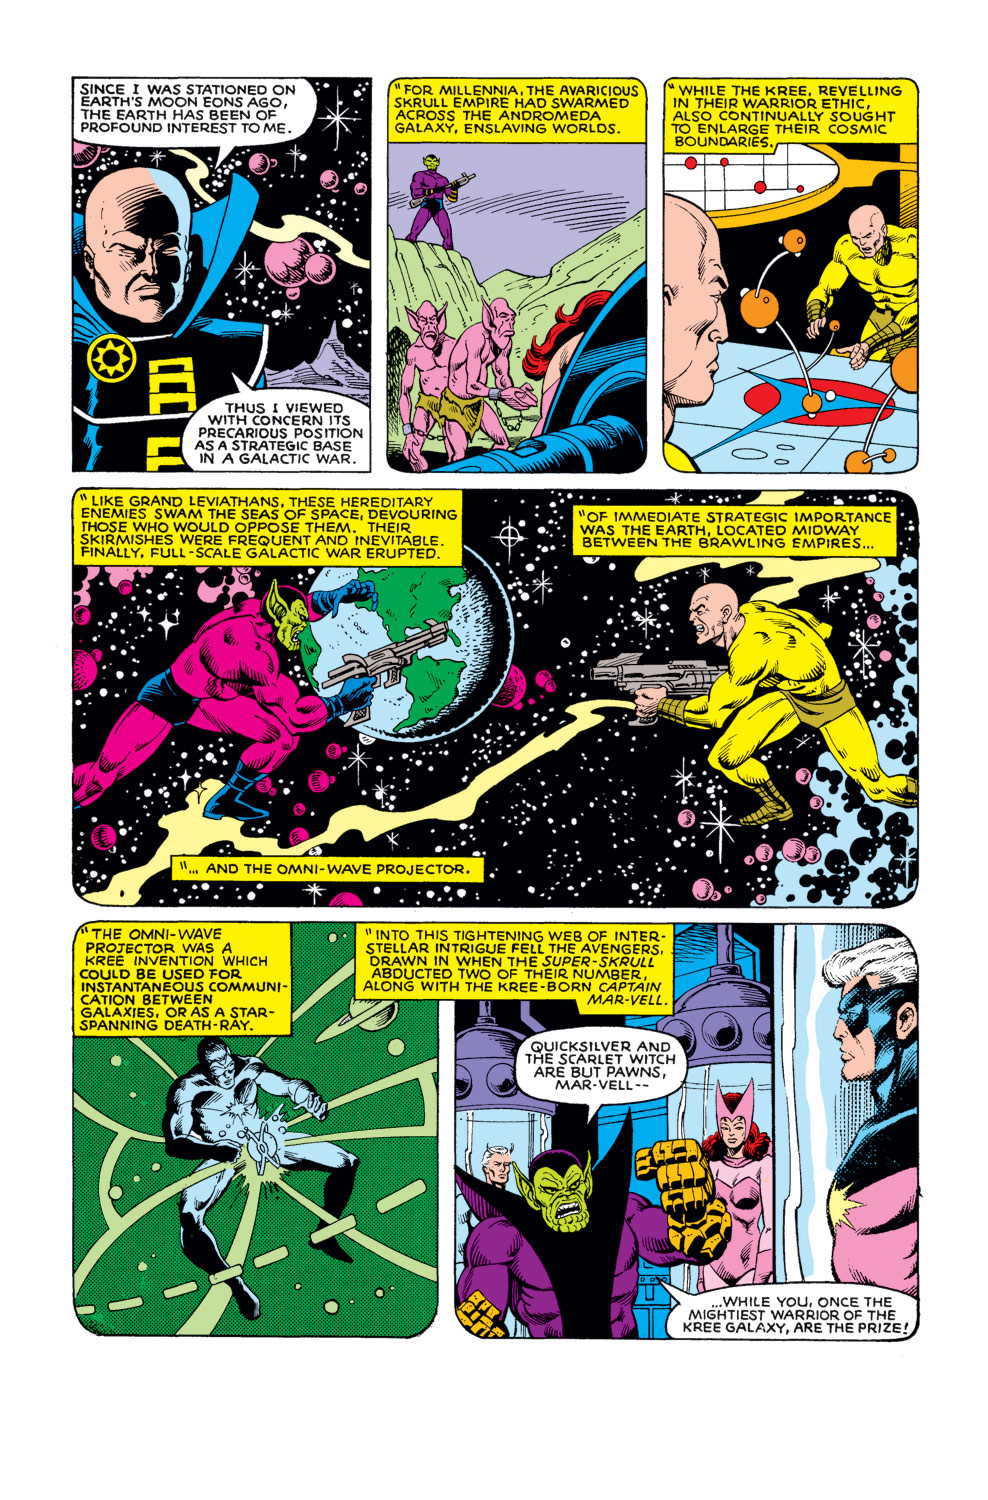 What If? (1977) issue 20 - The Avengers fought the Kree-Skrull war without Rick Jones - Page 3